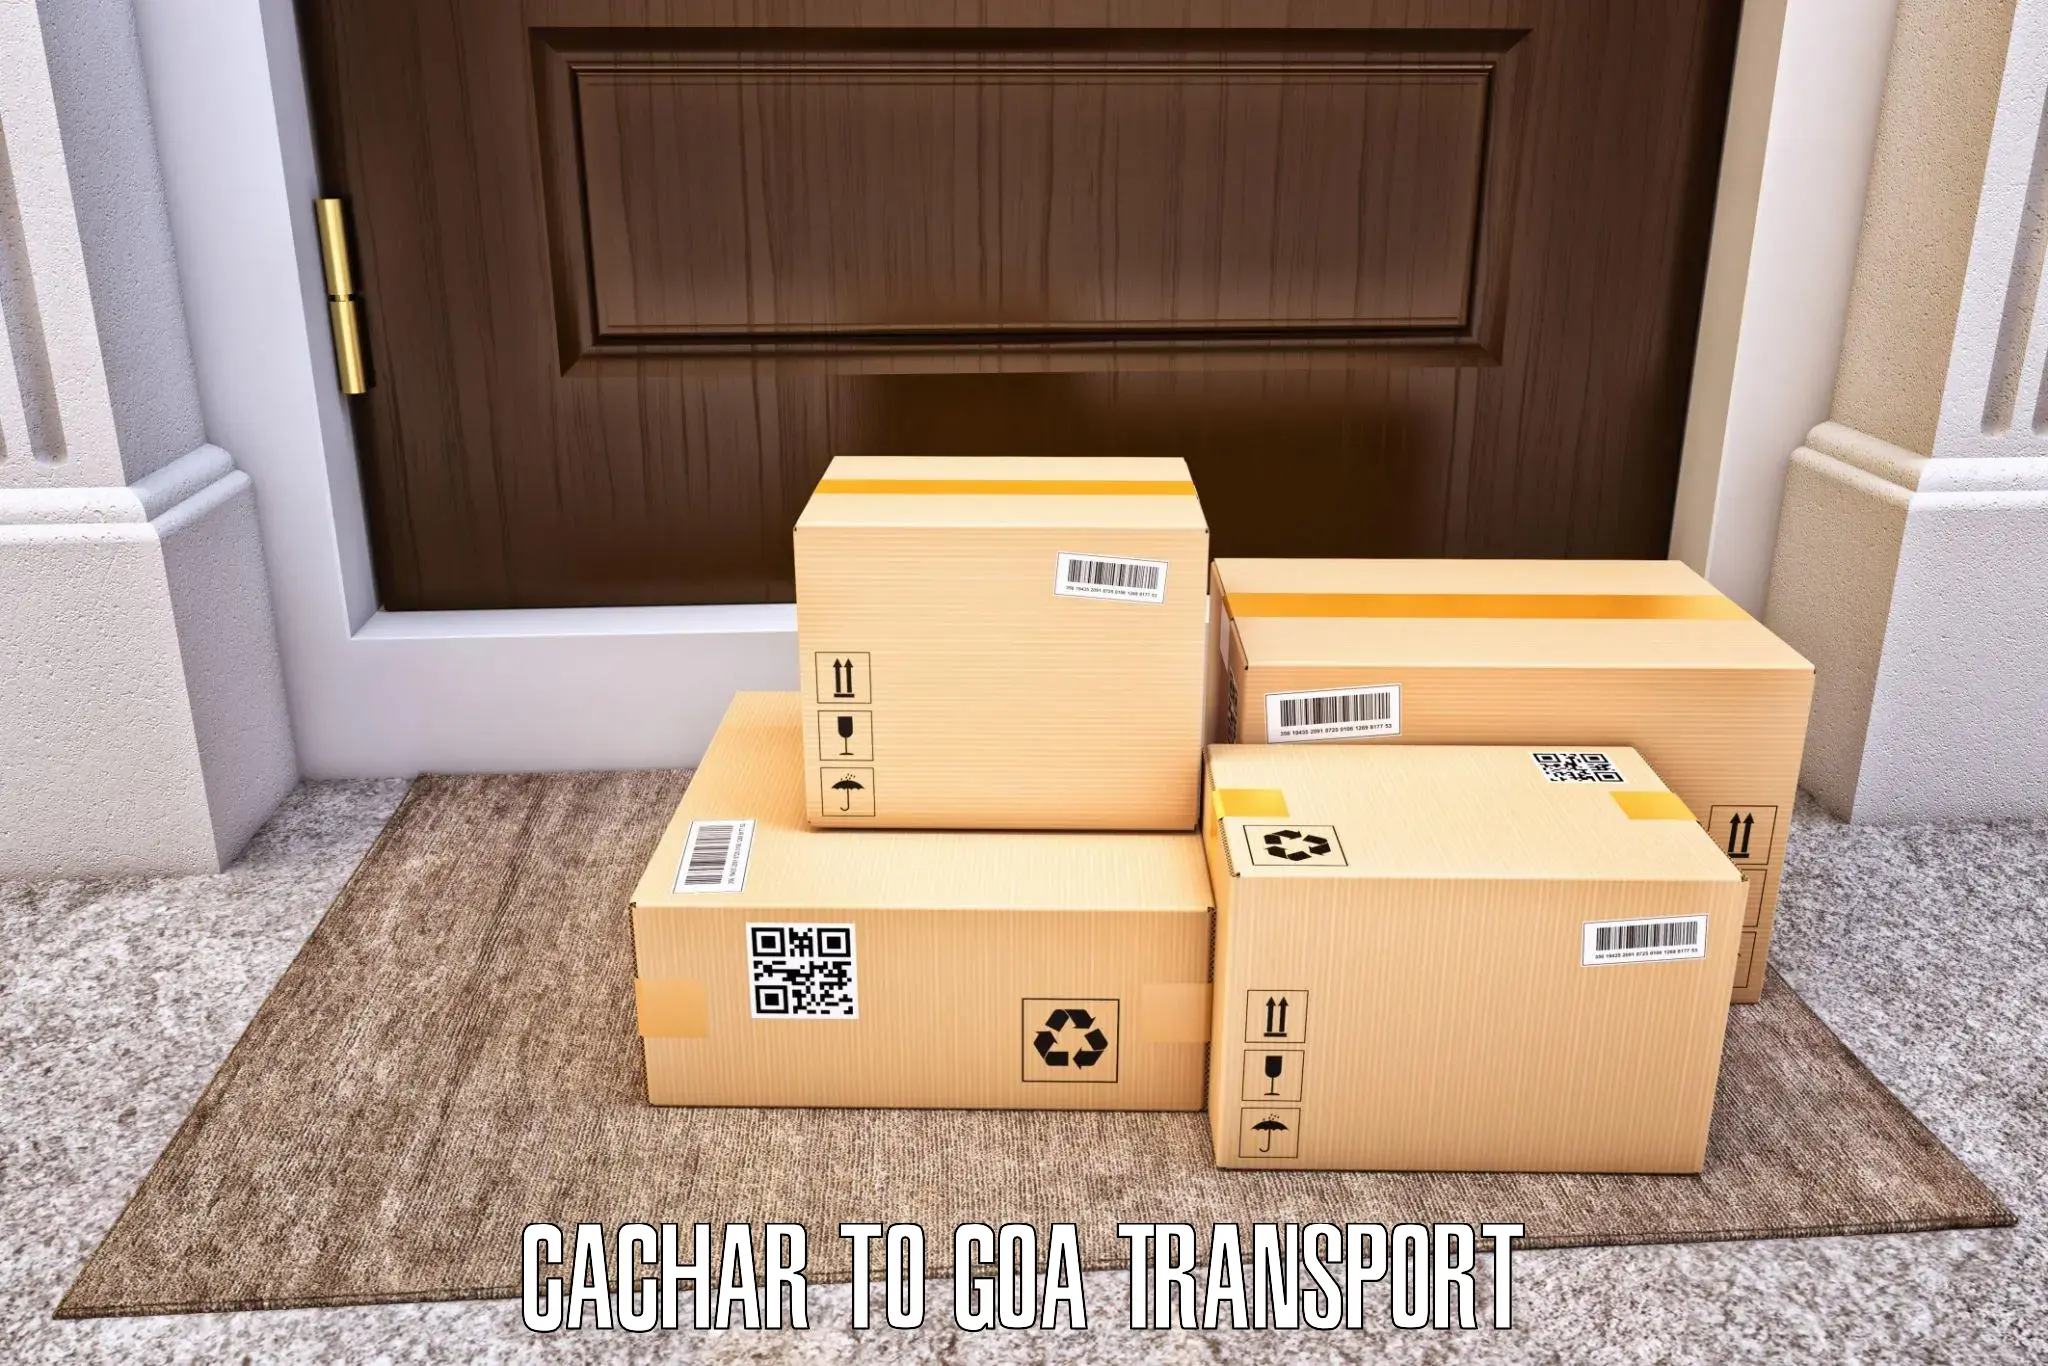 Nearby transport service Cachar to IIT Goa